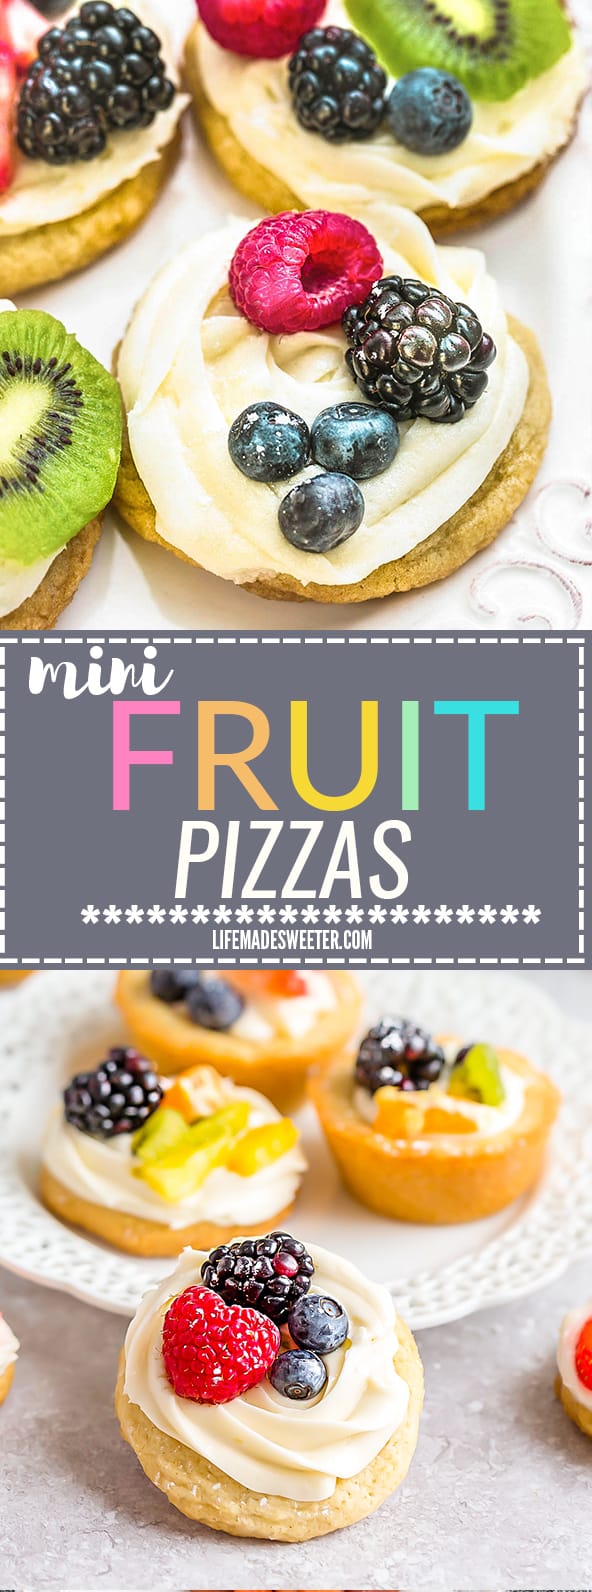 Mini Fruit Pizza - a classic dessert made using homemade soft sugar cookies topped with fresh fruit. Perfect for spring or summer barbecues, potlucks, showers, and parties. Best of all, no dough chilling required and easy to customize! Use a mix of fresh strawberries, blueberries, blackberries, raspberries, kiwi, mandarin oranges or pineapples! 